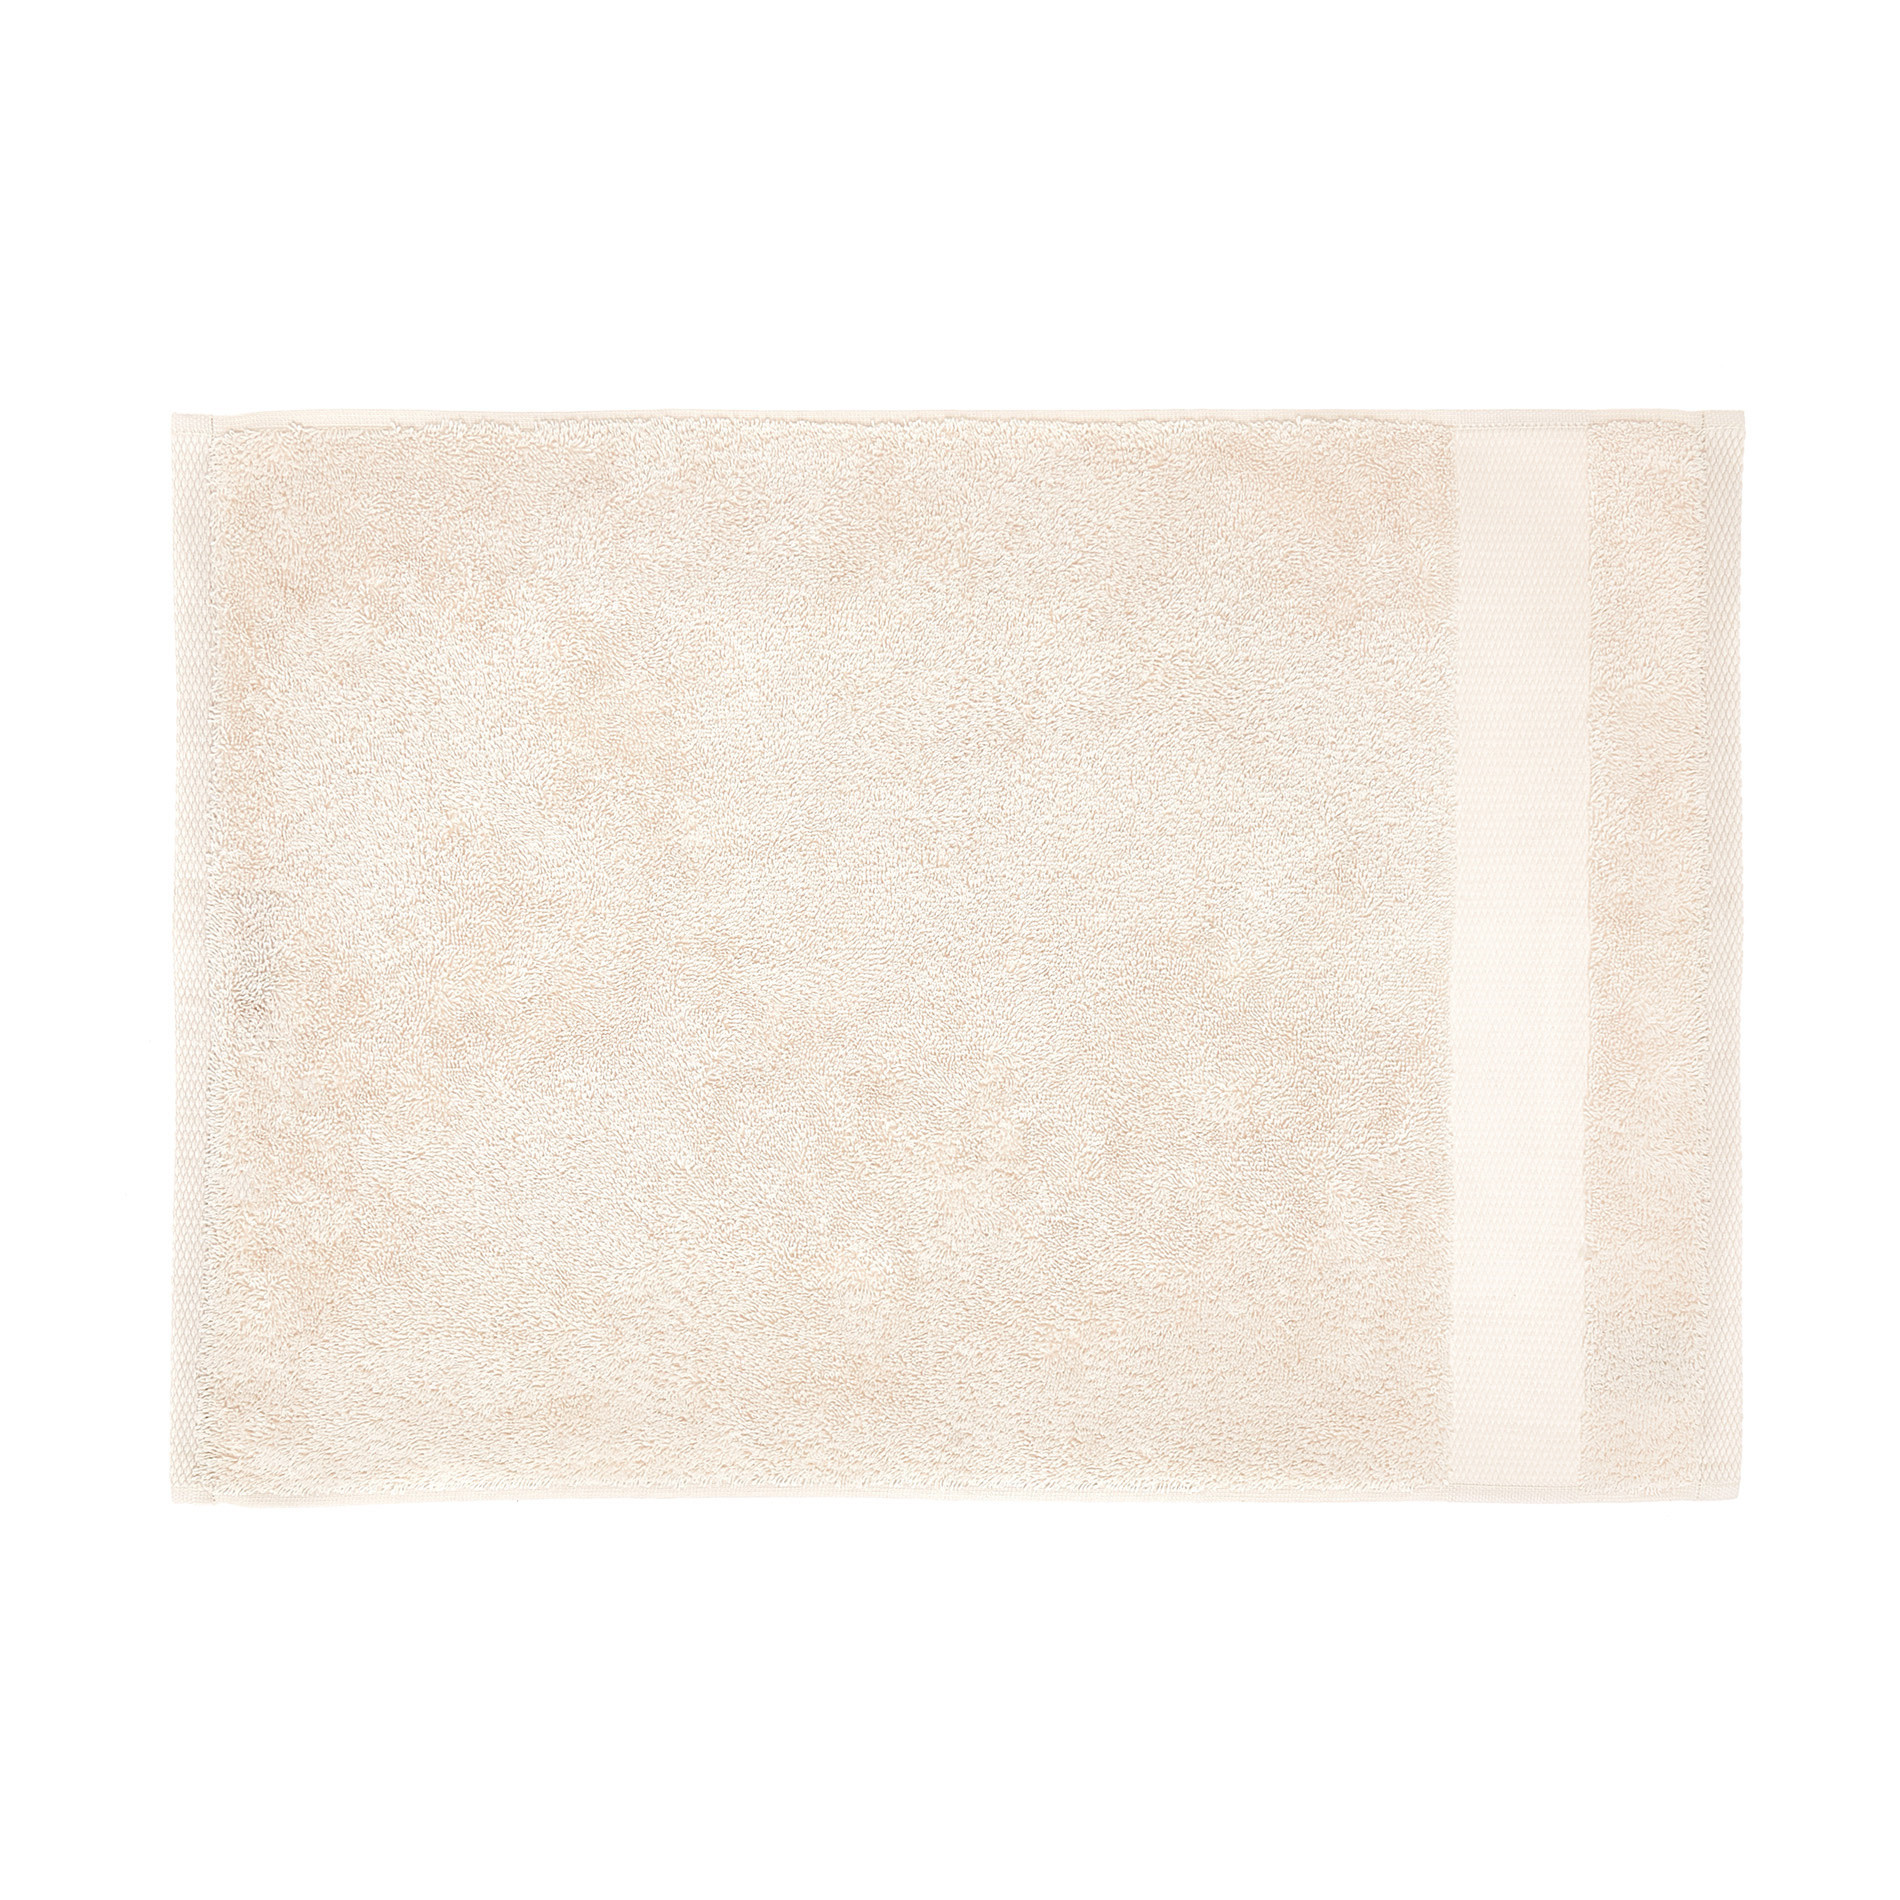 Zefiro pure cotton terry towel, Nougat Beige, large image number 2